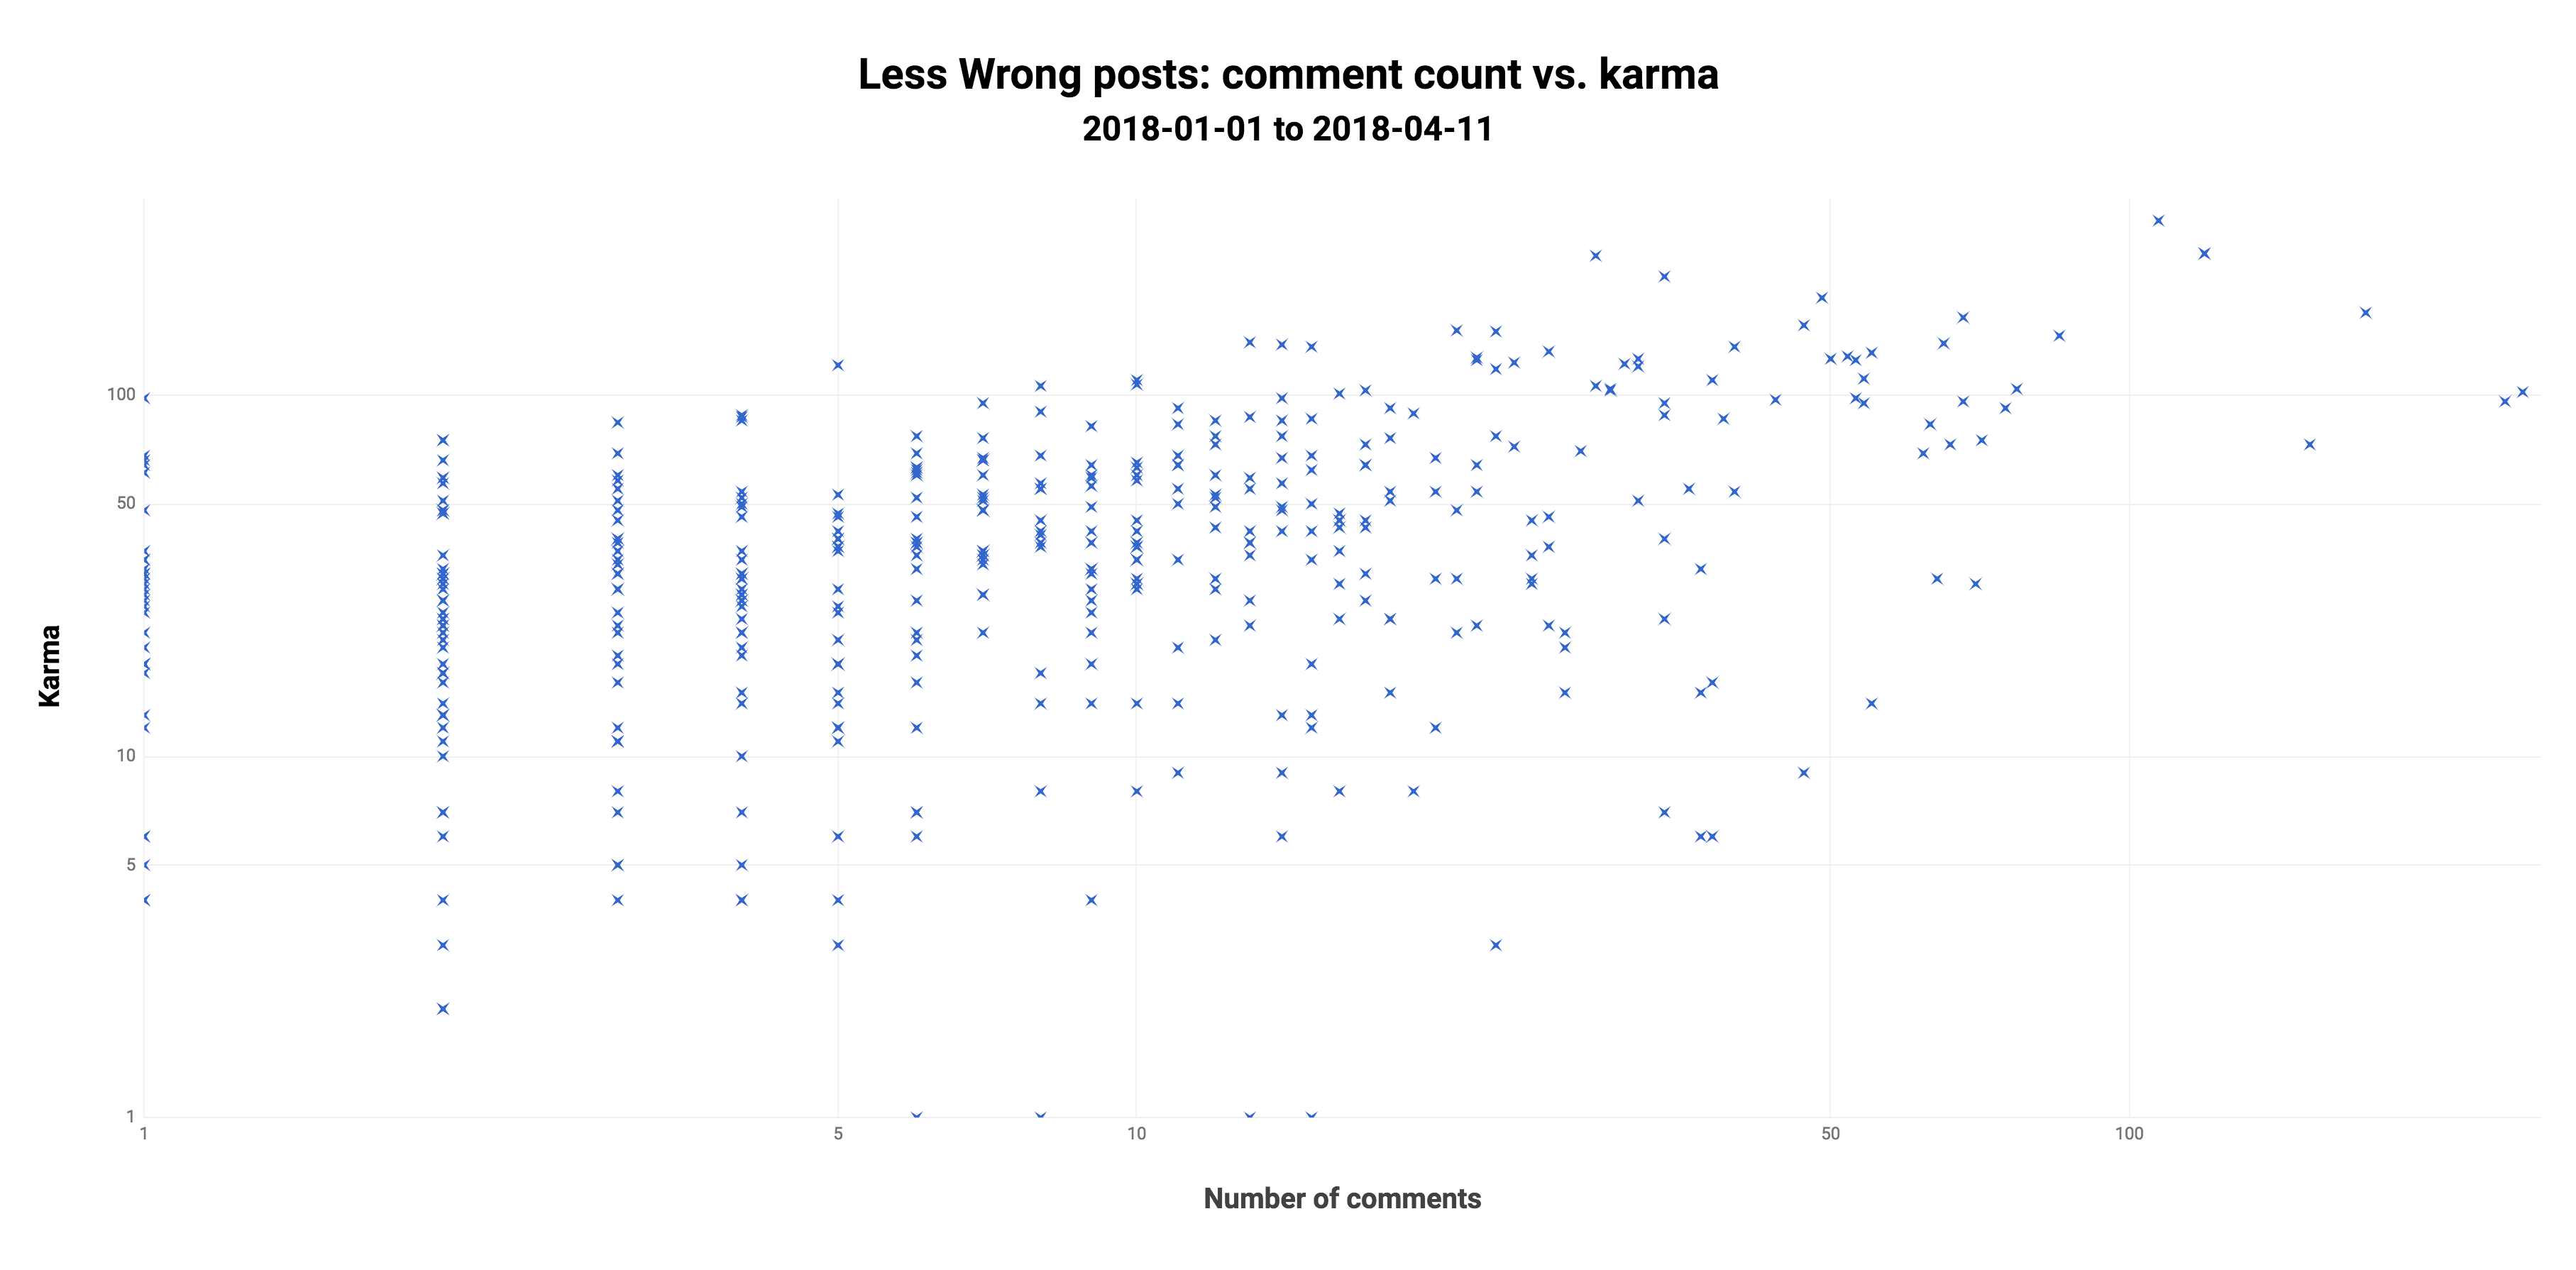 Less Wrong posts: comment count vs. karma (log scale)